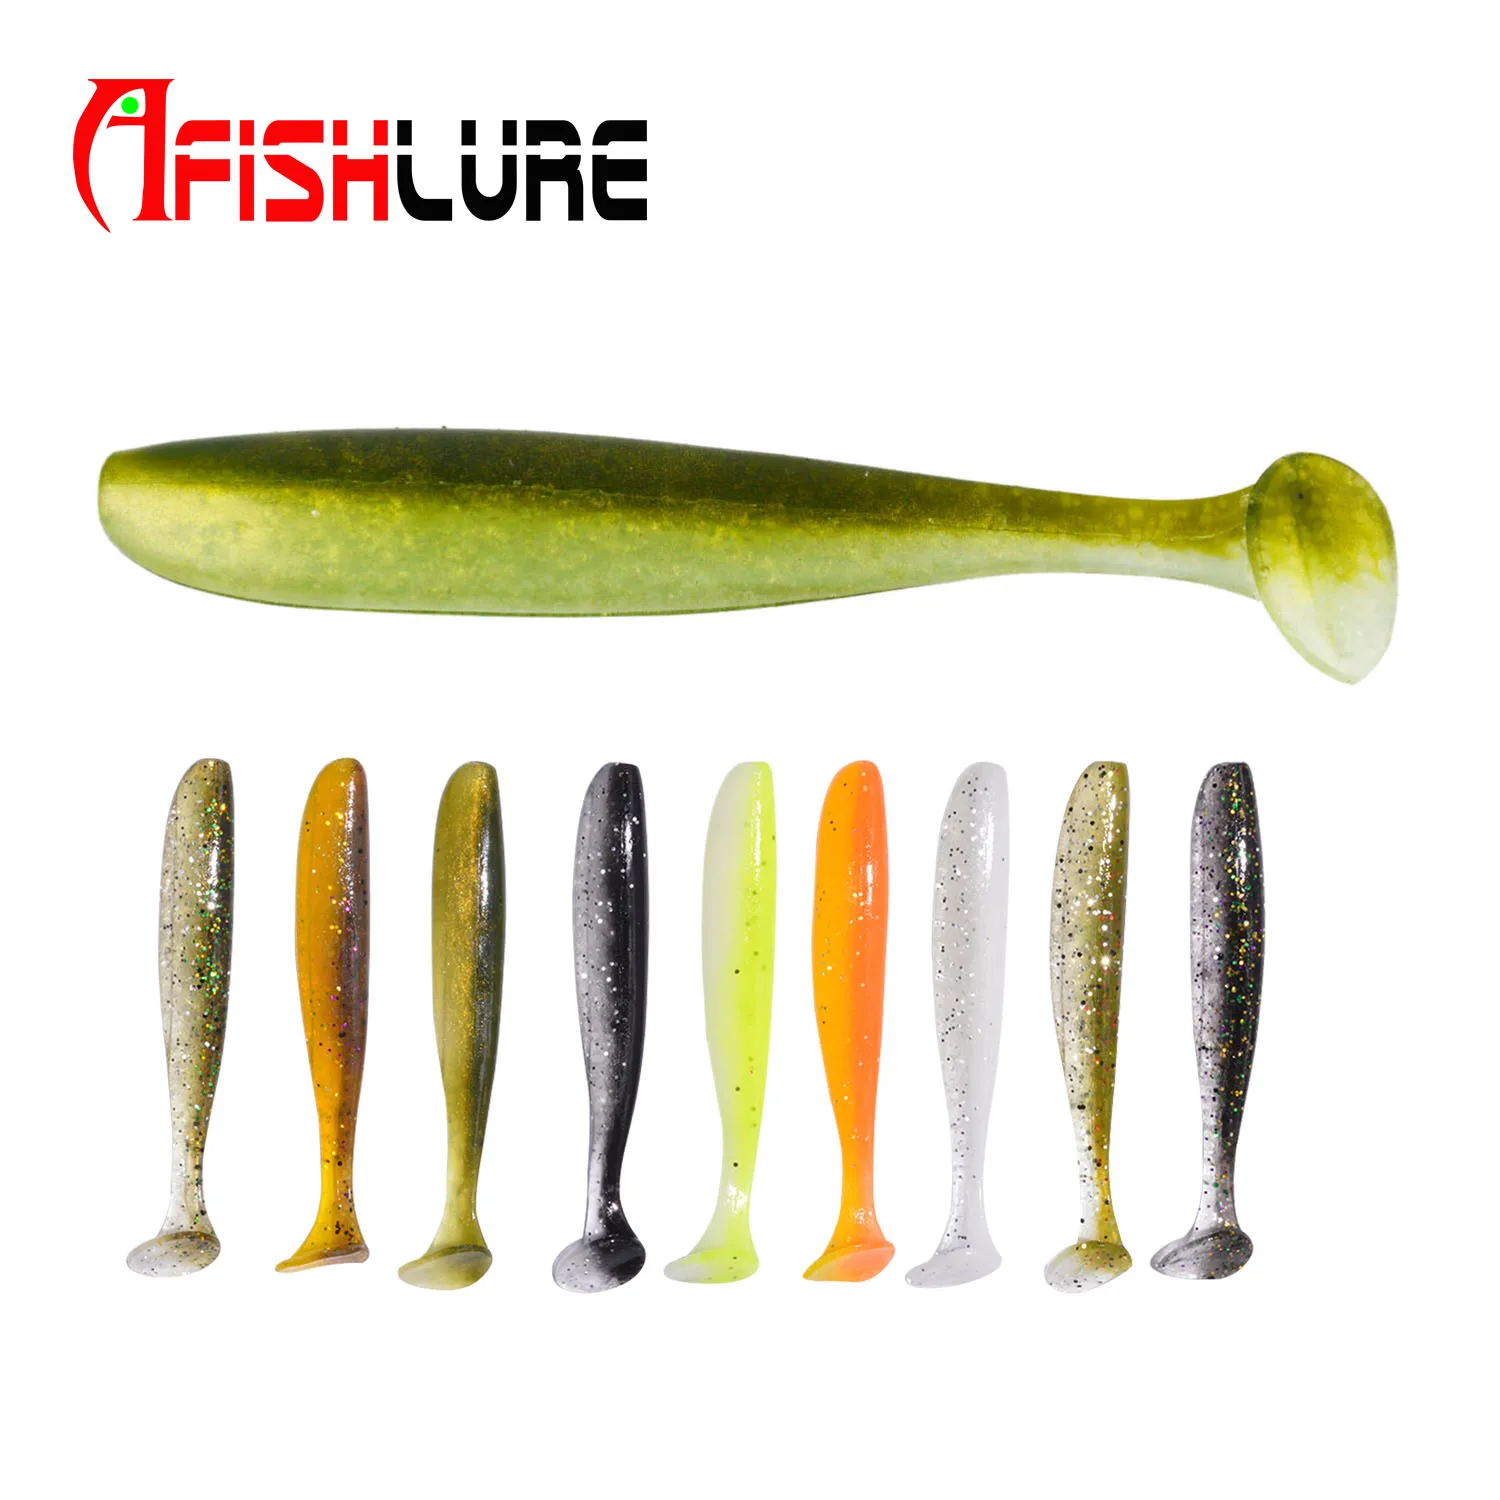 

Afishlure isca artificial TT Shad fish lure AR25 68mm 2.3g 10pcs/bag Double color T tail soft lure, Choose